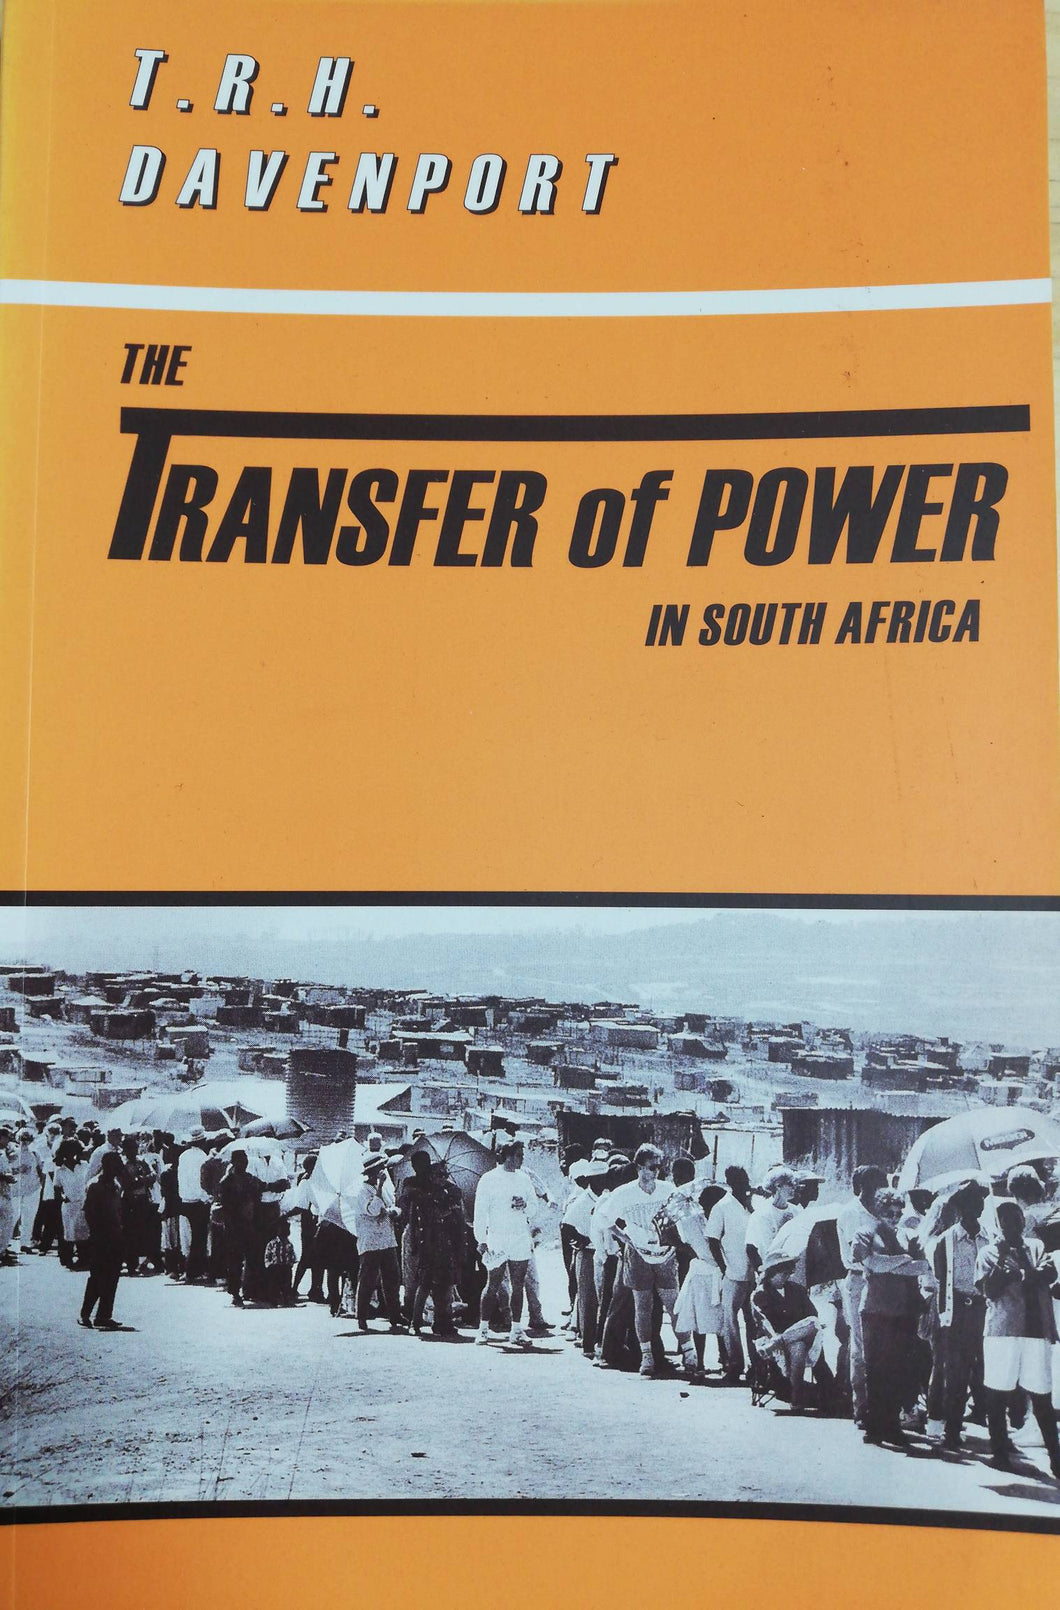 TRANSFER OF POWER IN SOUTH AFRICA